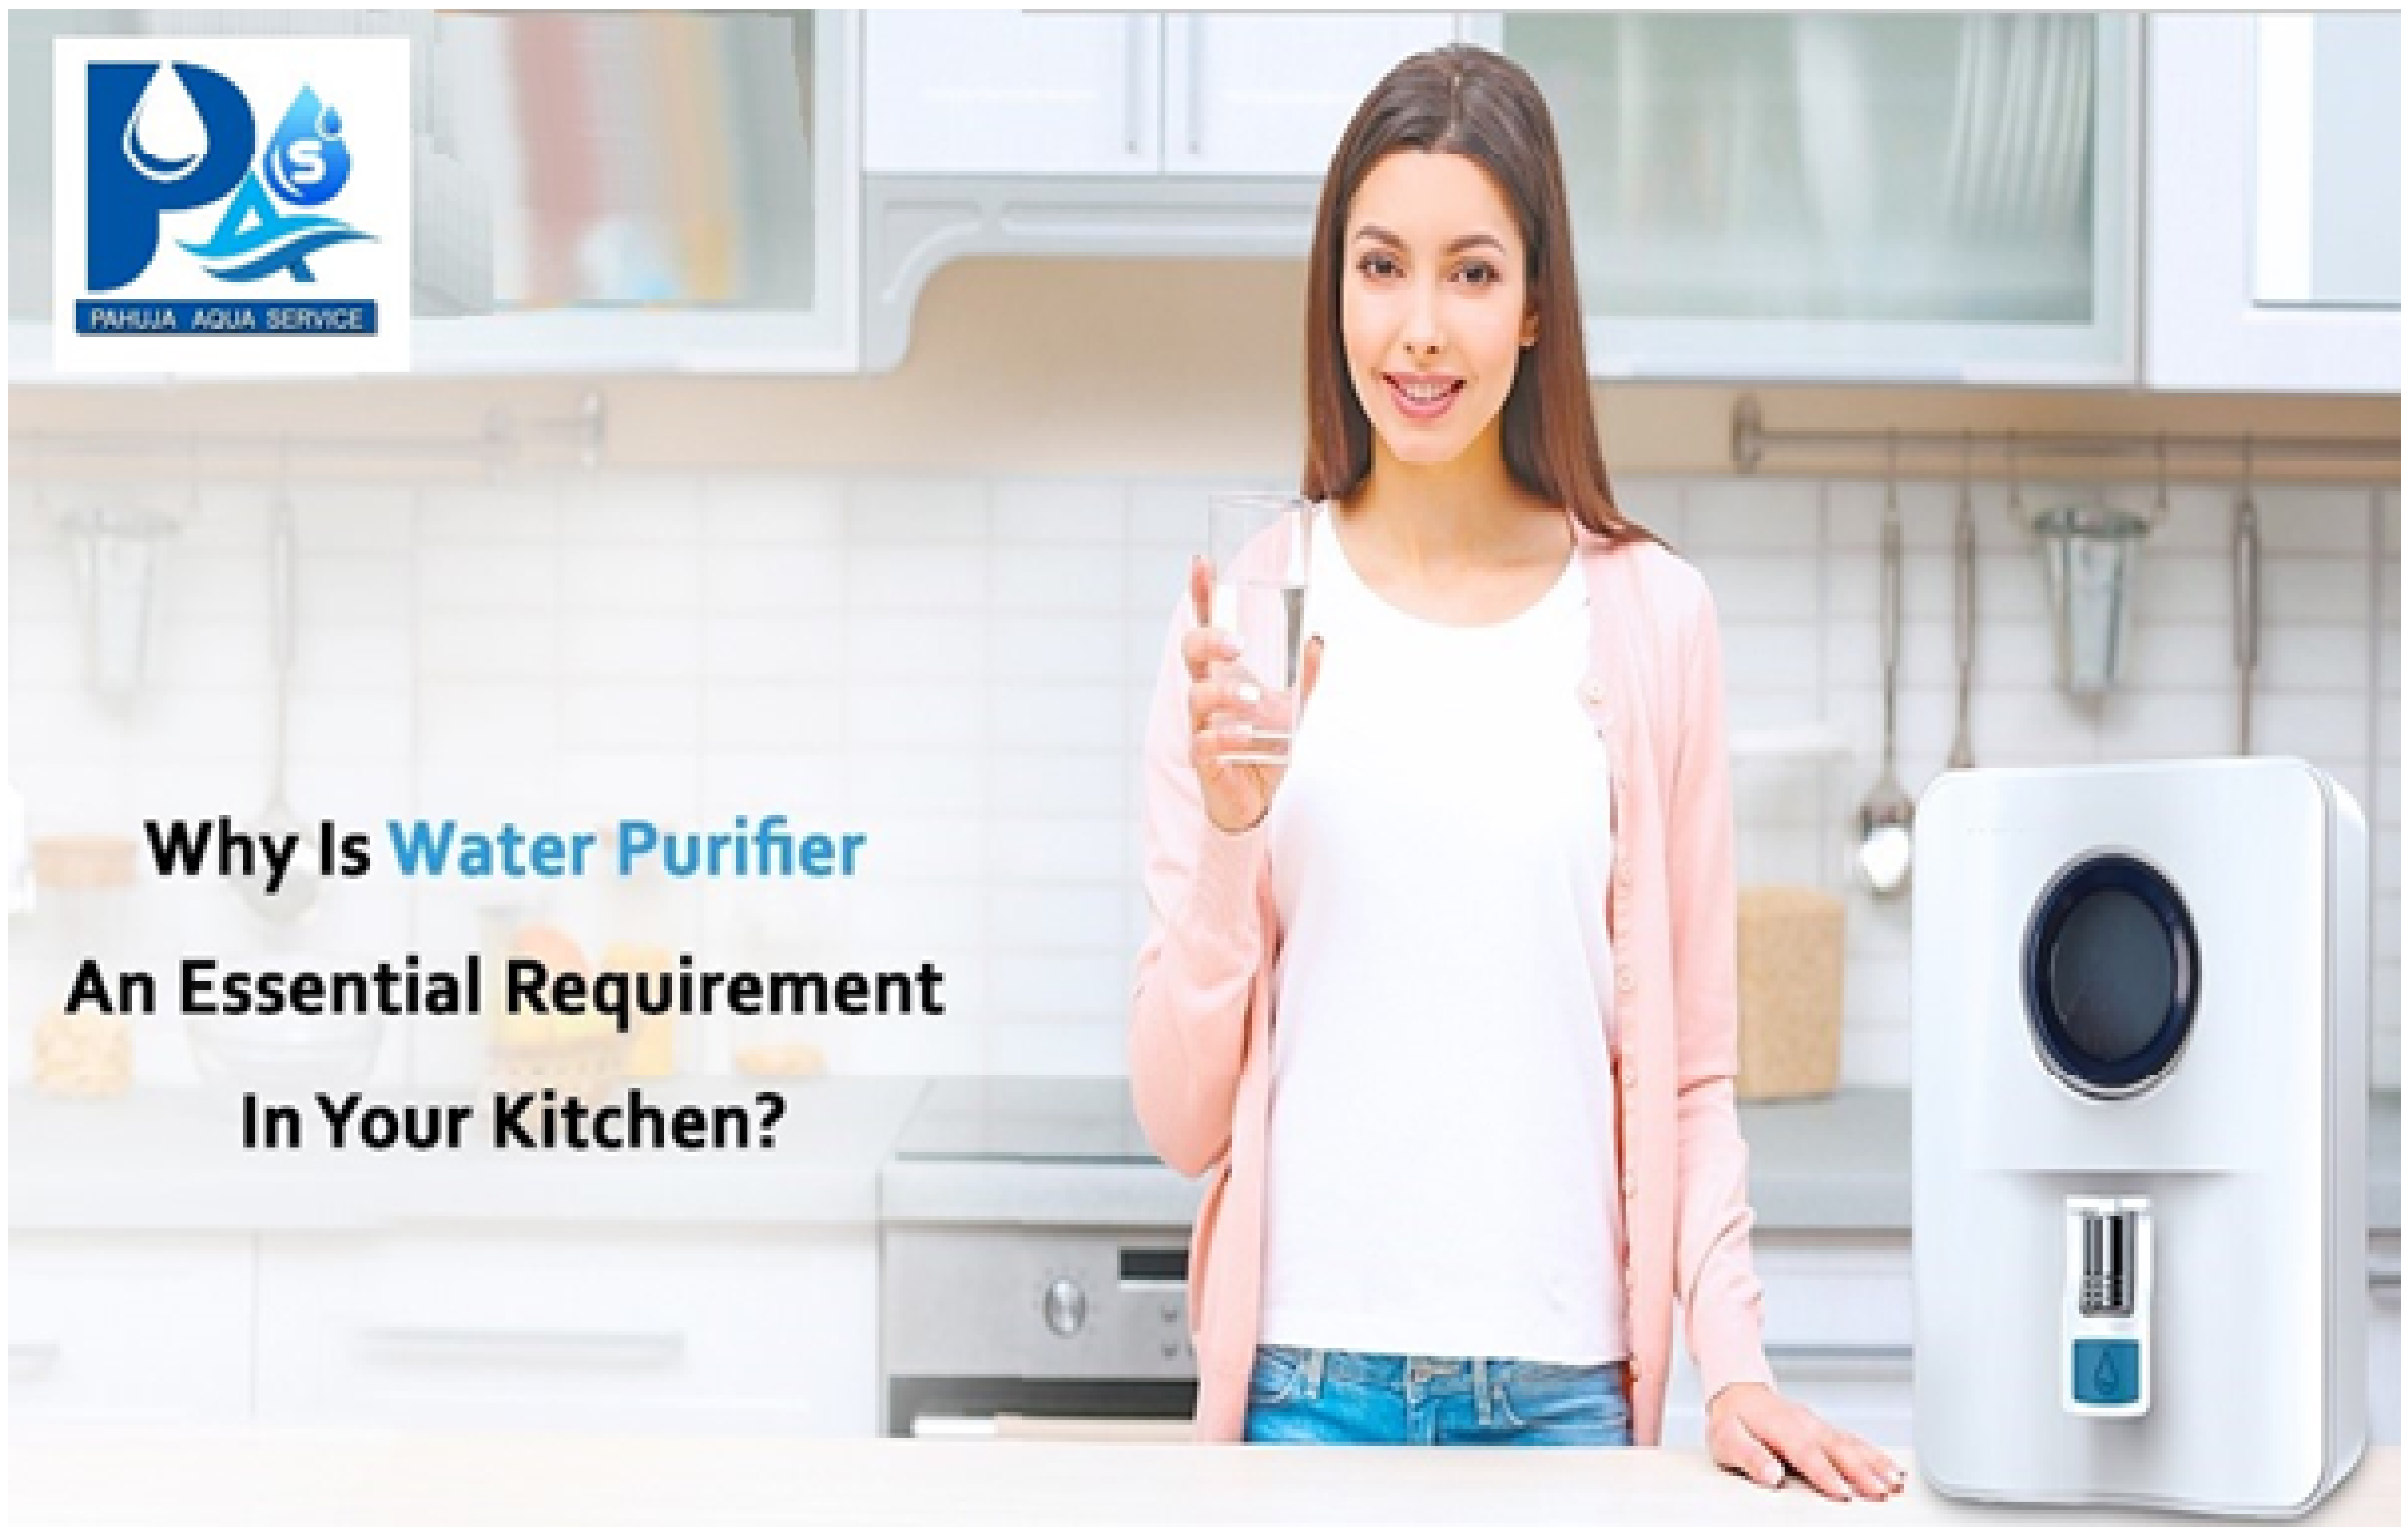 Why Install Water Purifier In Your Kitchen?